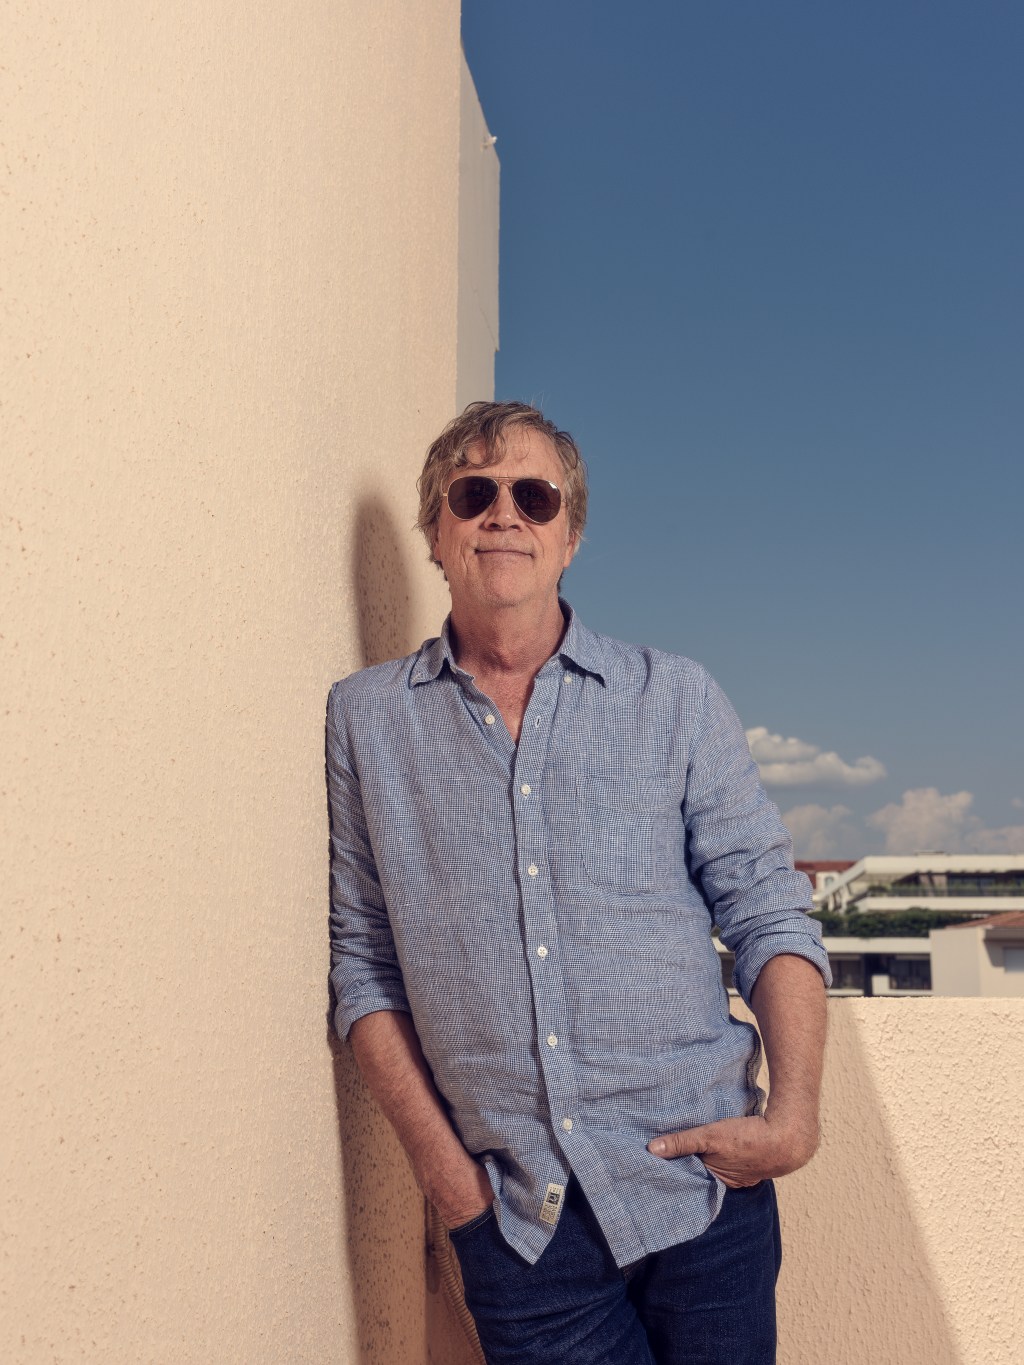  Todd Haynes On The Making Of ‘May December’ & Closing $11M Netflix Deal: It’s “An Incredible Vote Of Confidence” — Cannes Studio 